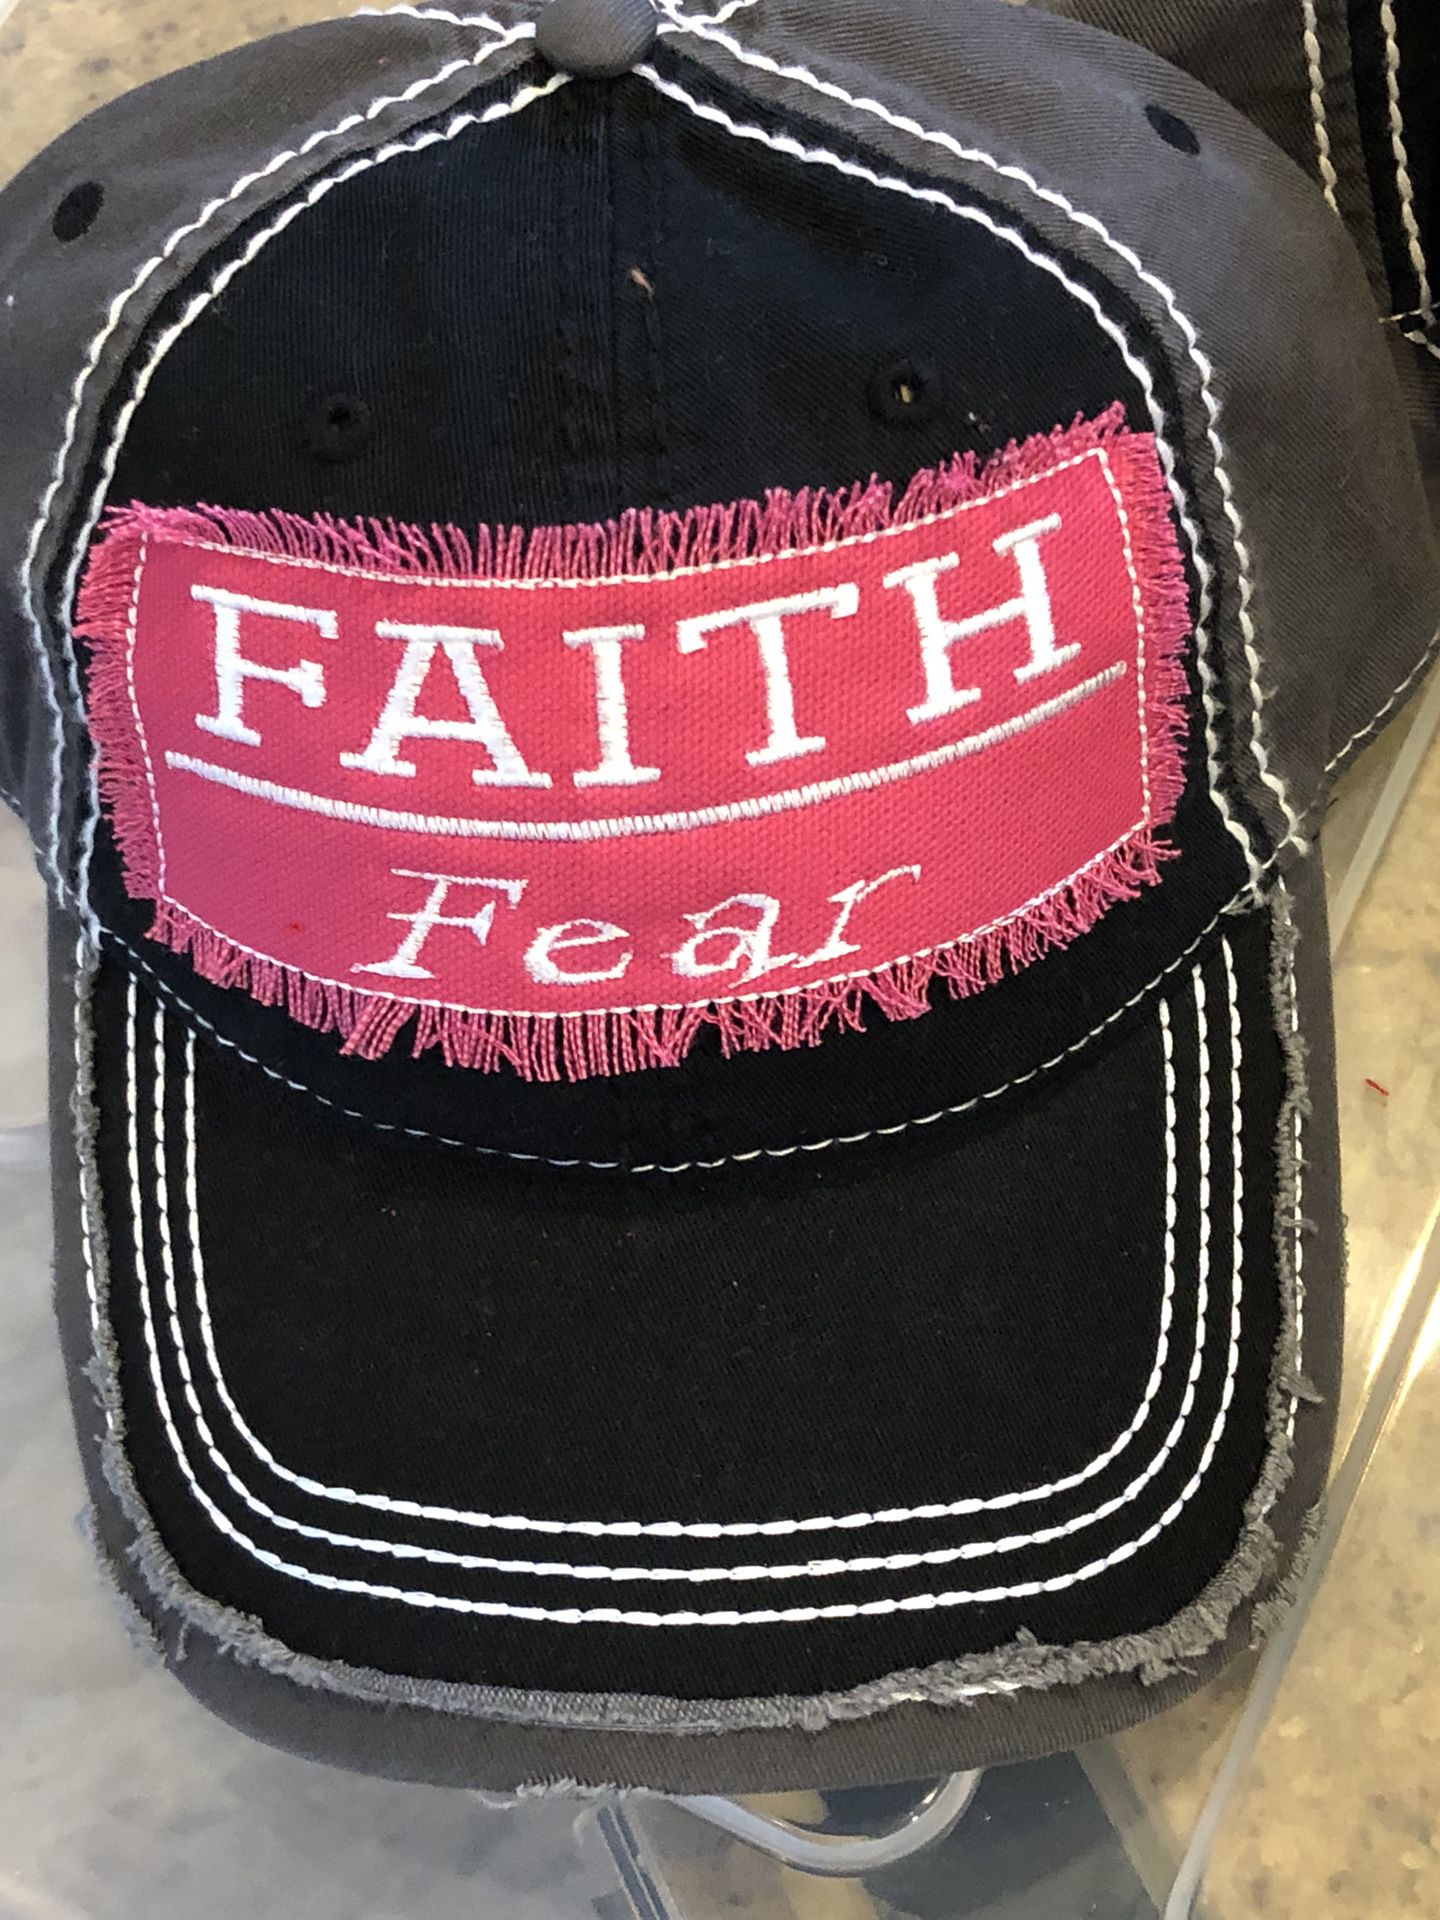 Faith over Fear distressed custom hat - black, grey and hot pink